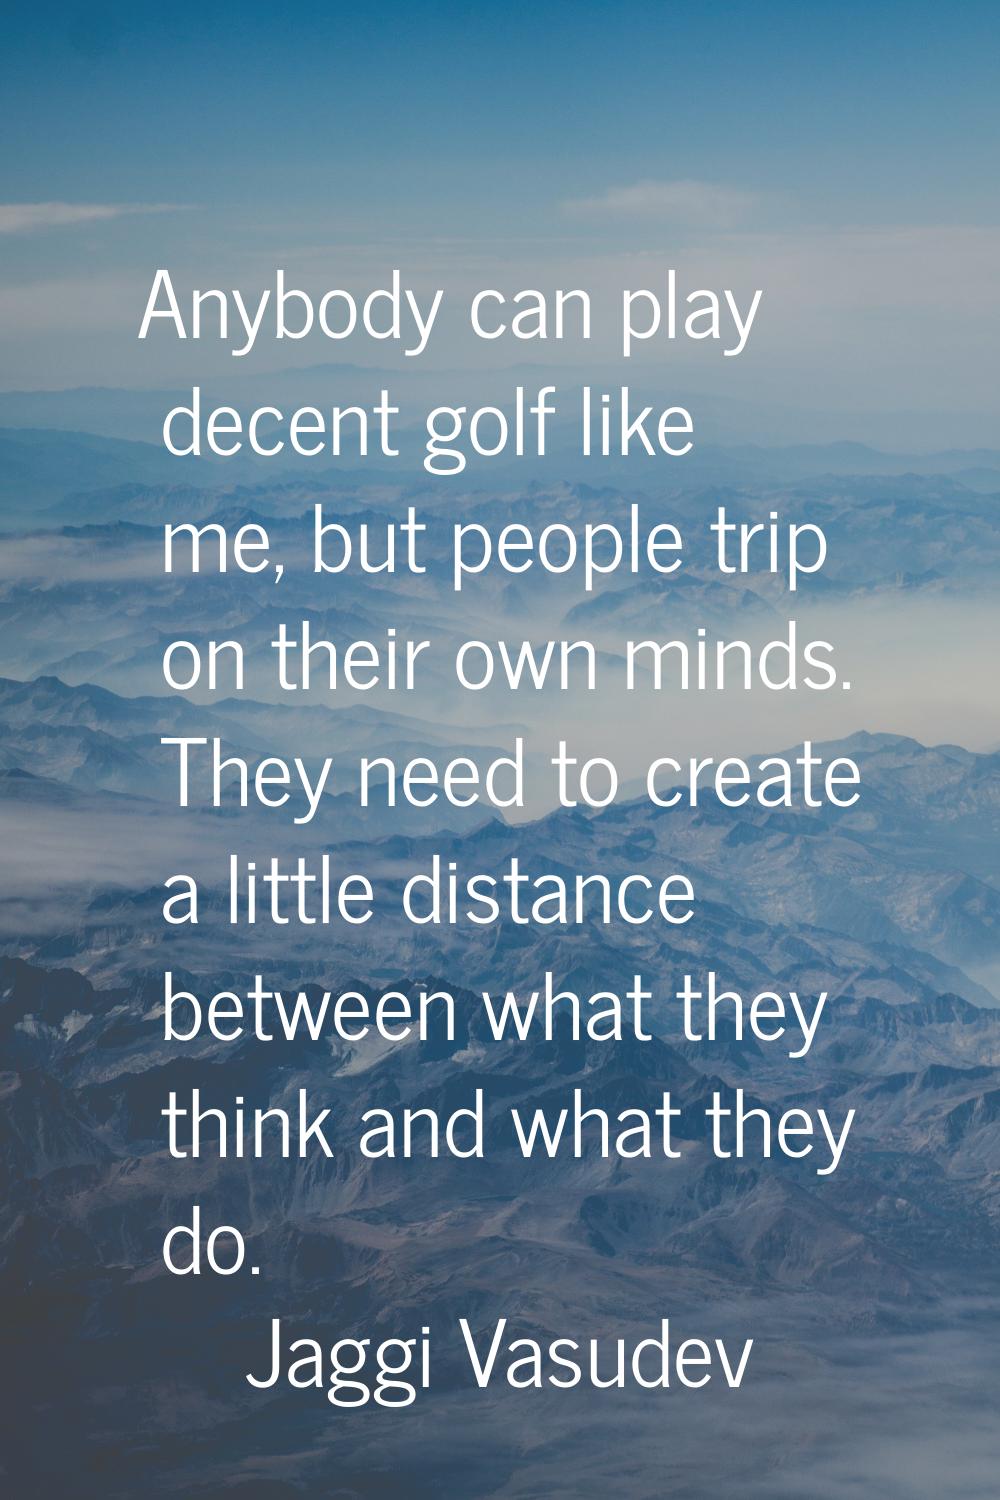 Anybody can play decent golf like me, but people trip on their own minds. They need to create a lit